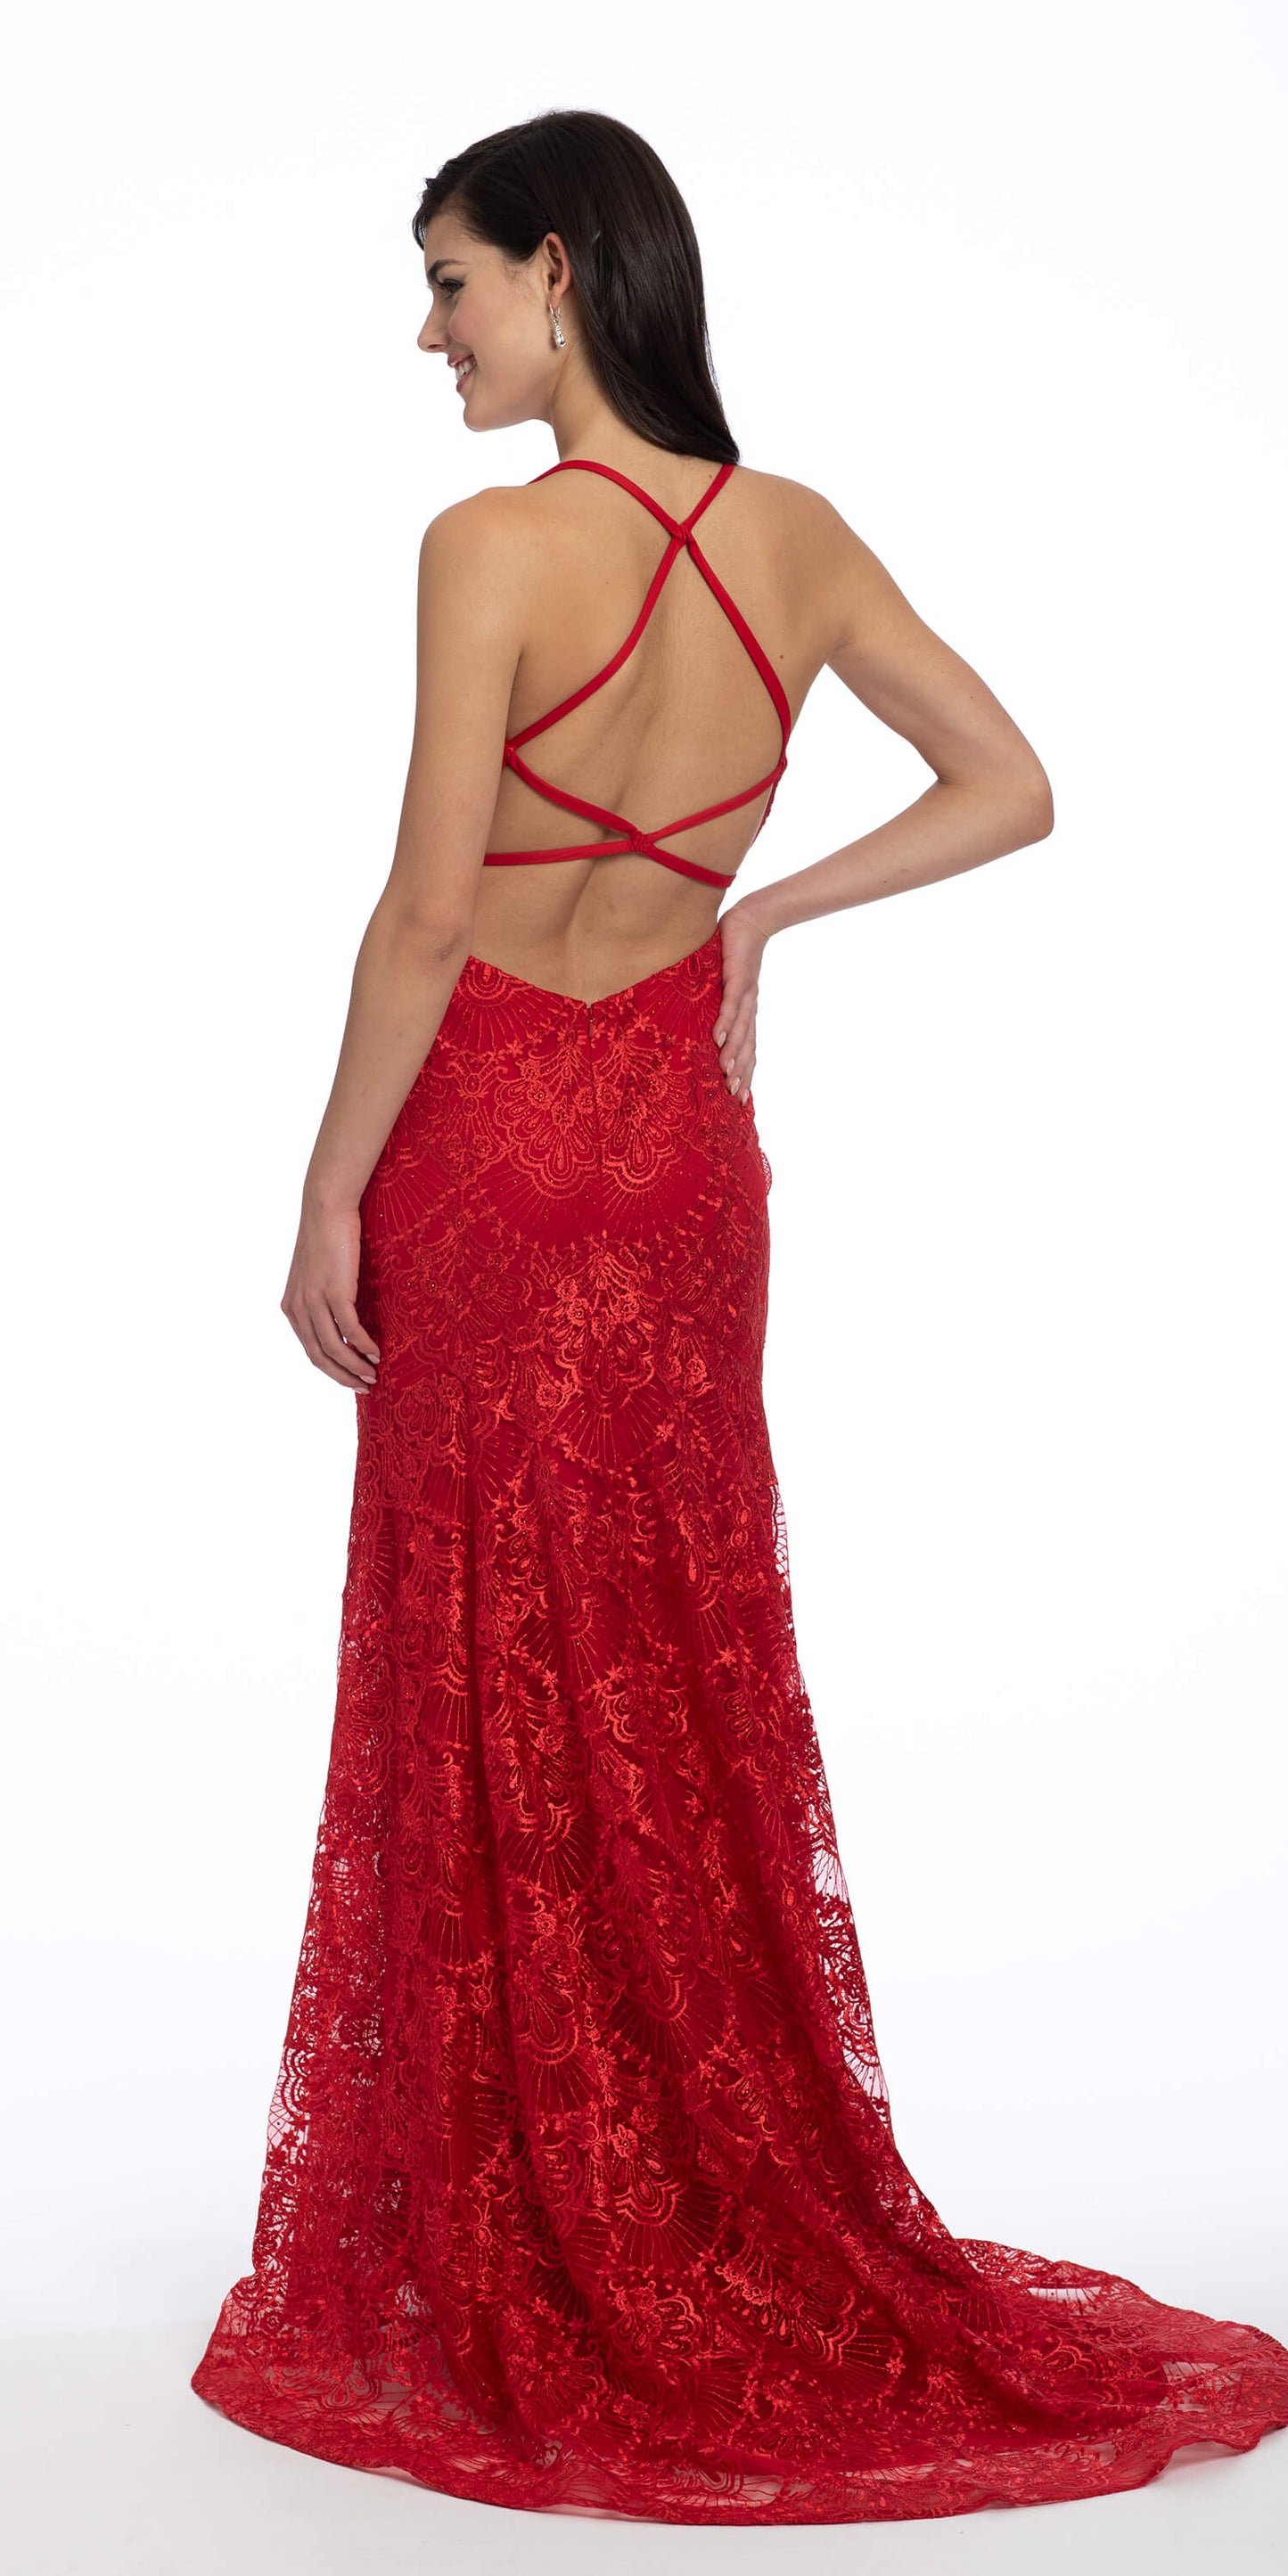 Classic backless dress - Red – LeiLuna Collection Europe